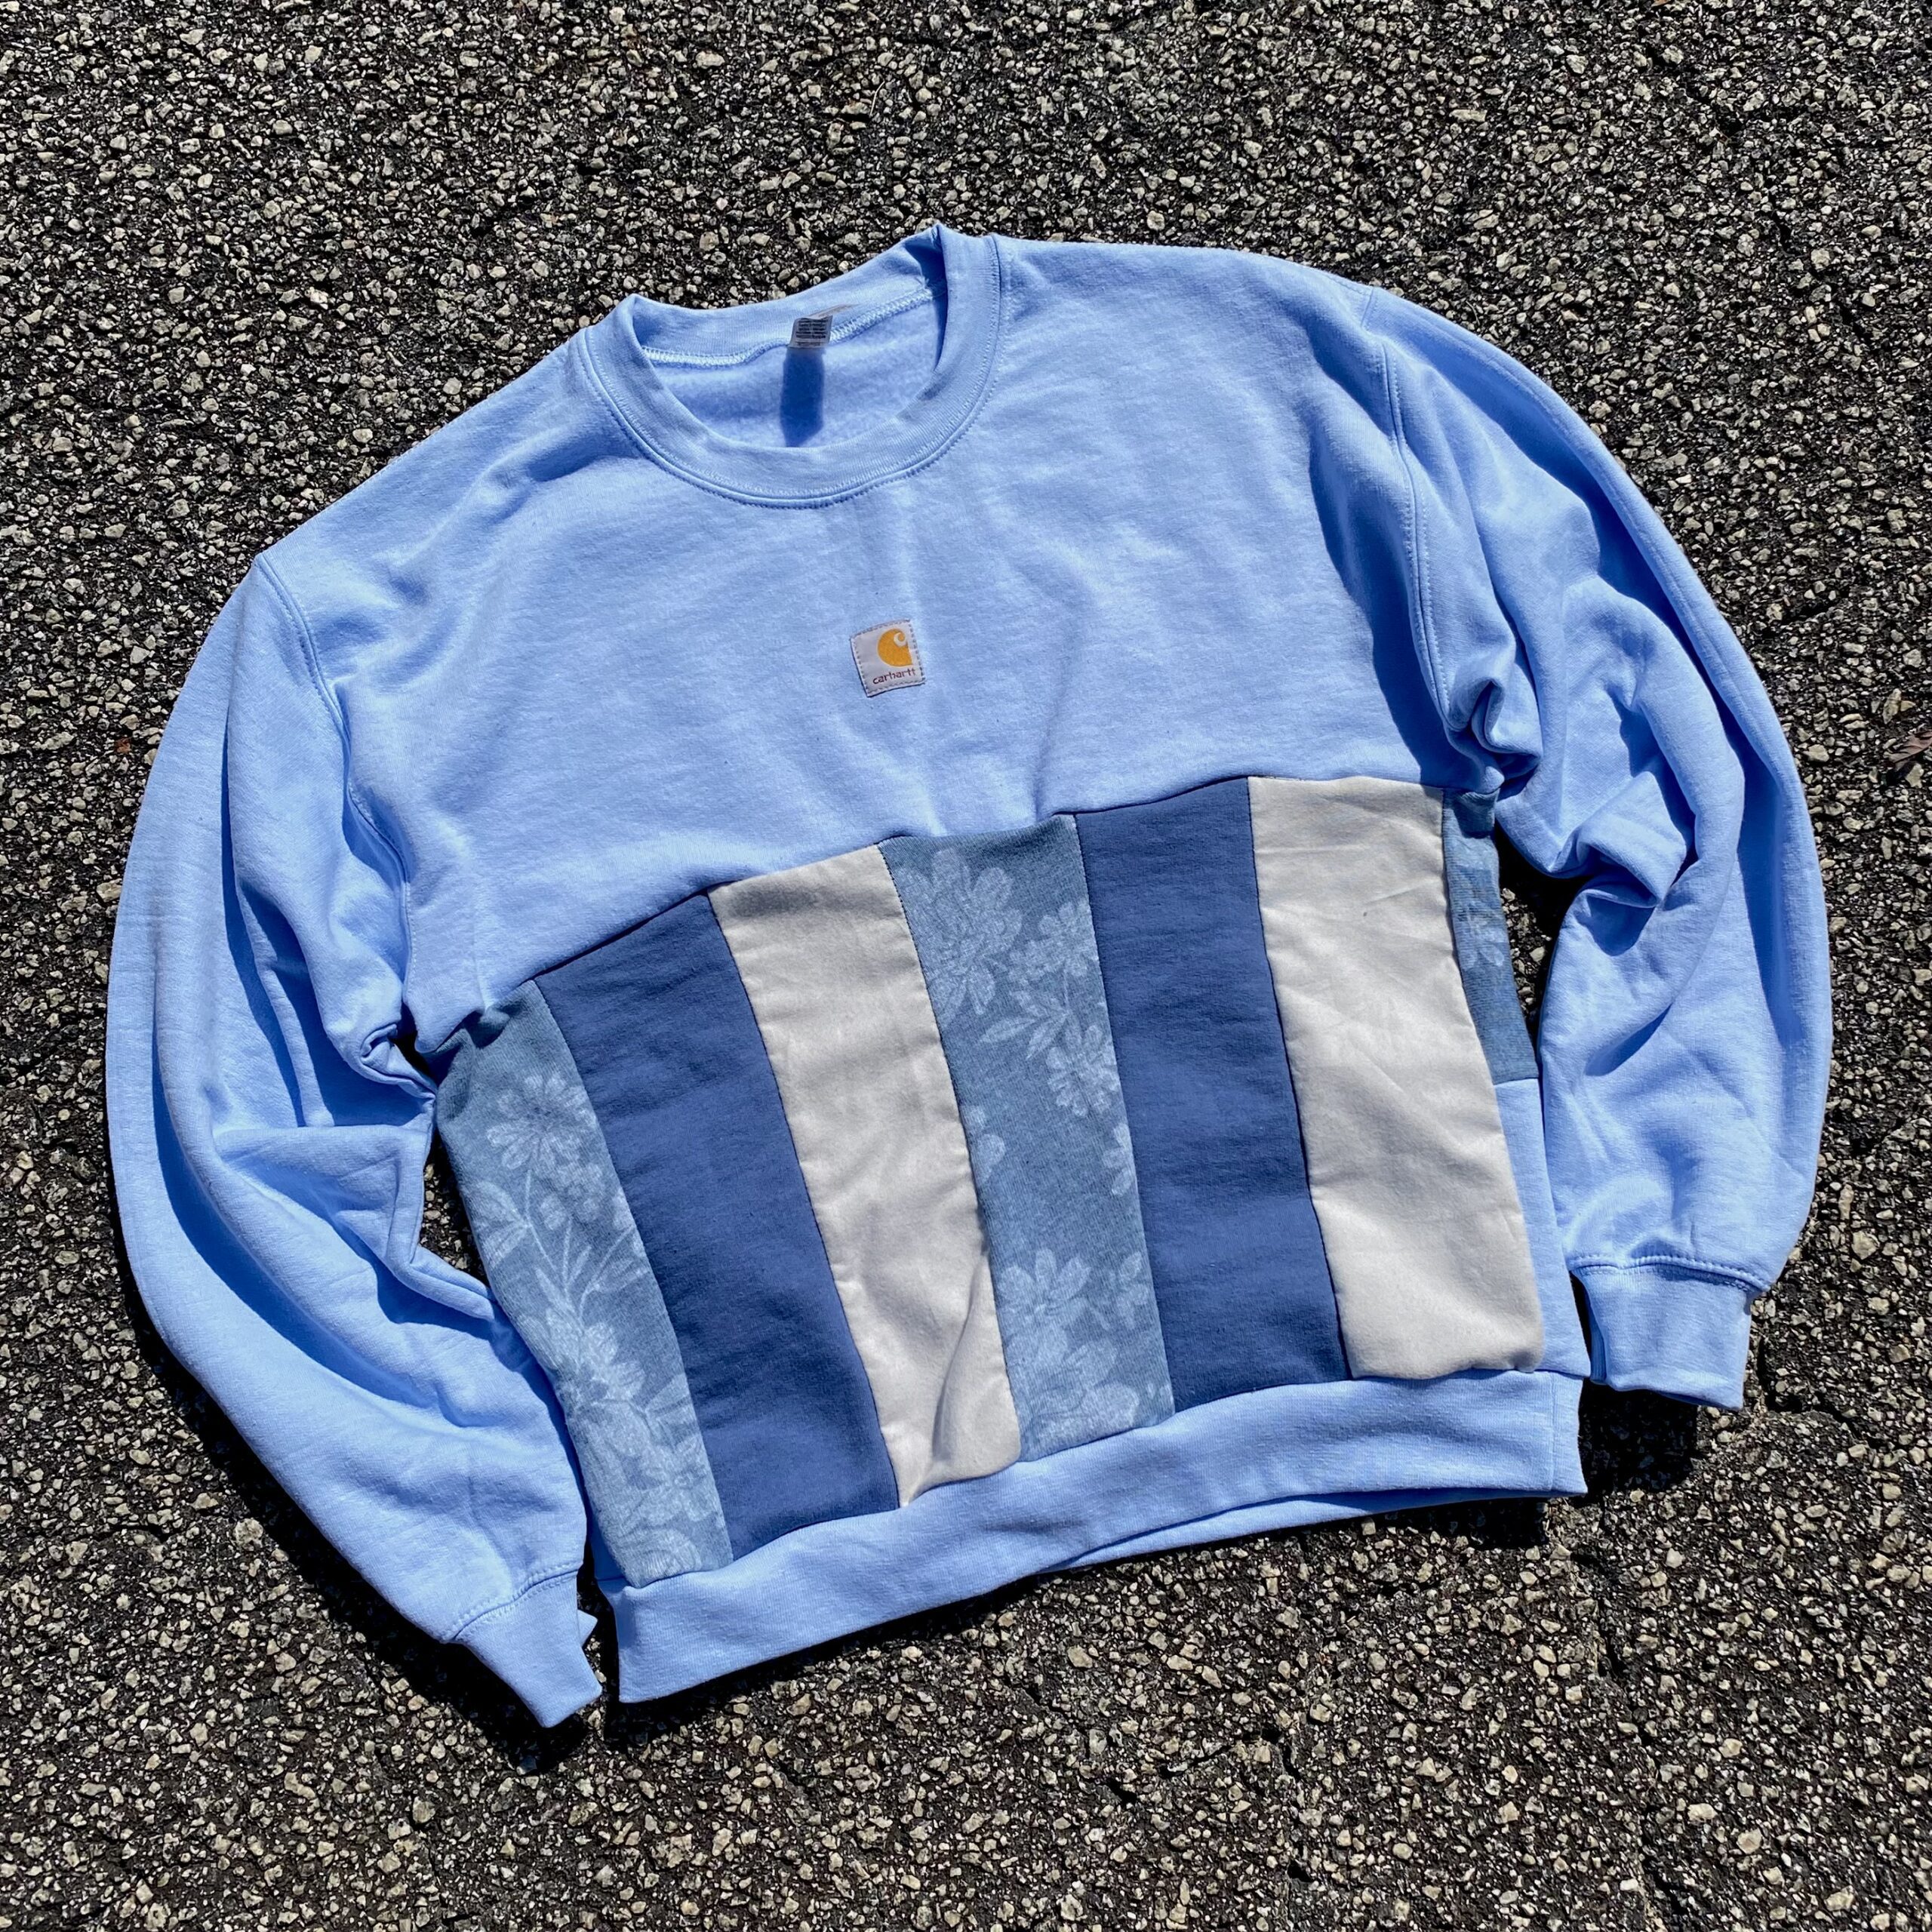 A blue and grey sweatshirt laying on the ground.